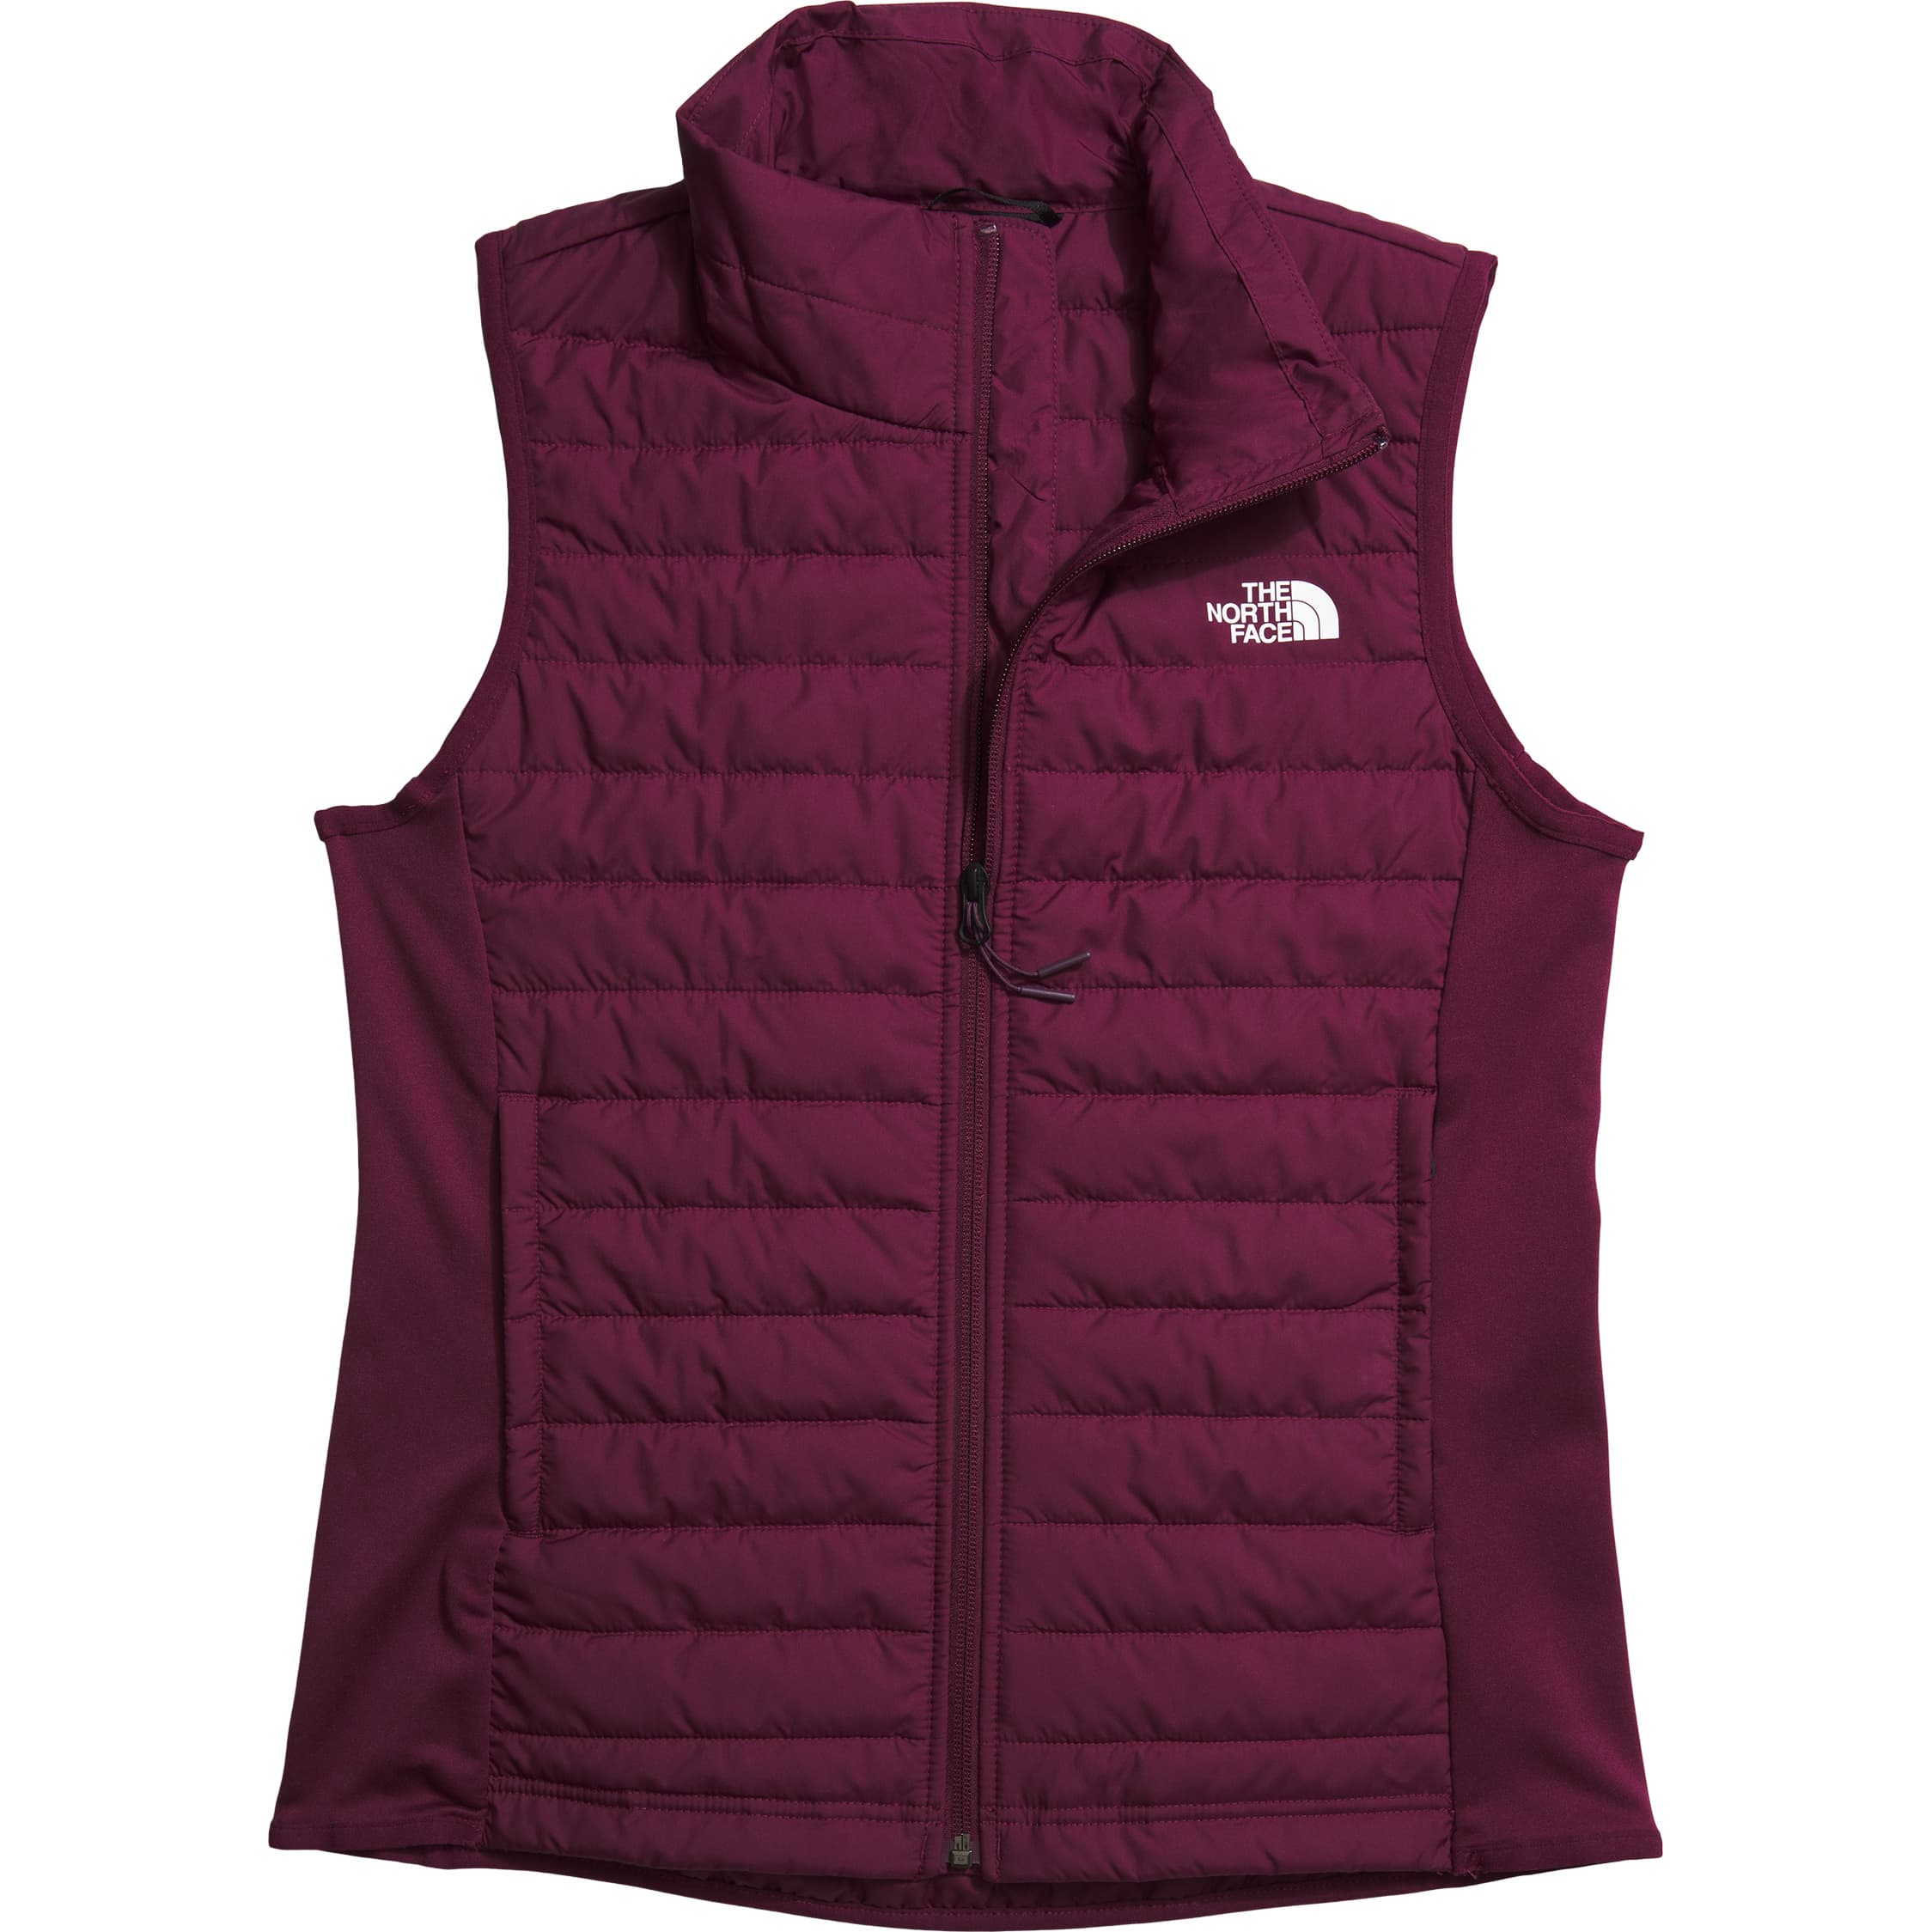 The North Face® Women’s Canyonlands Hybrid Vest | Cabela's Canada